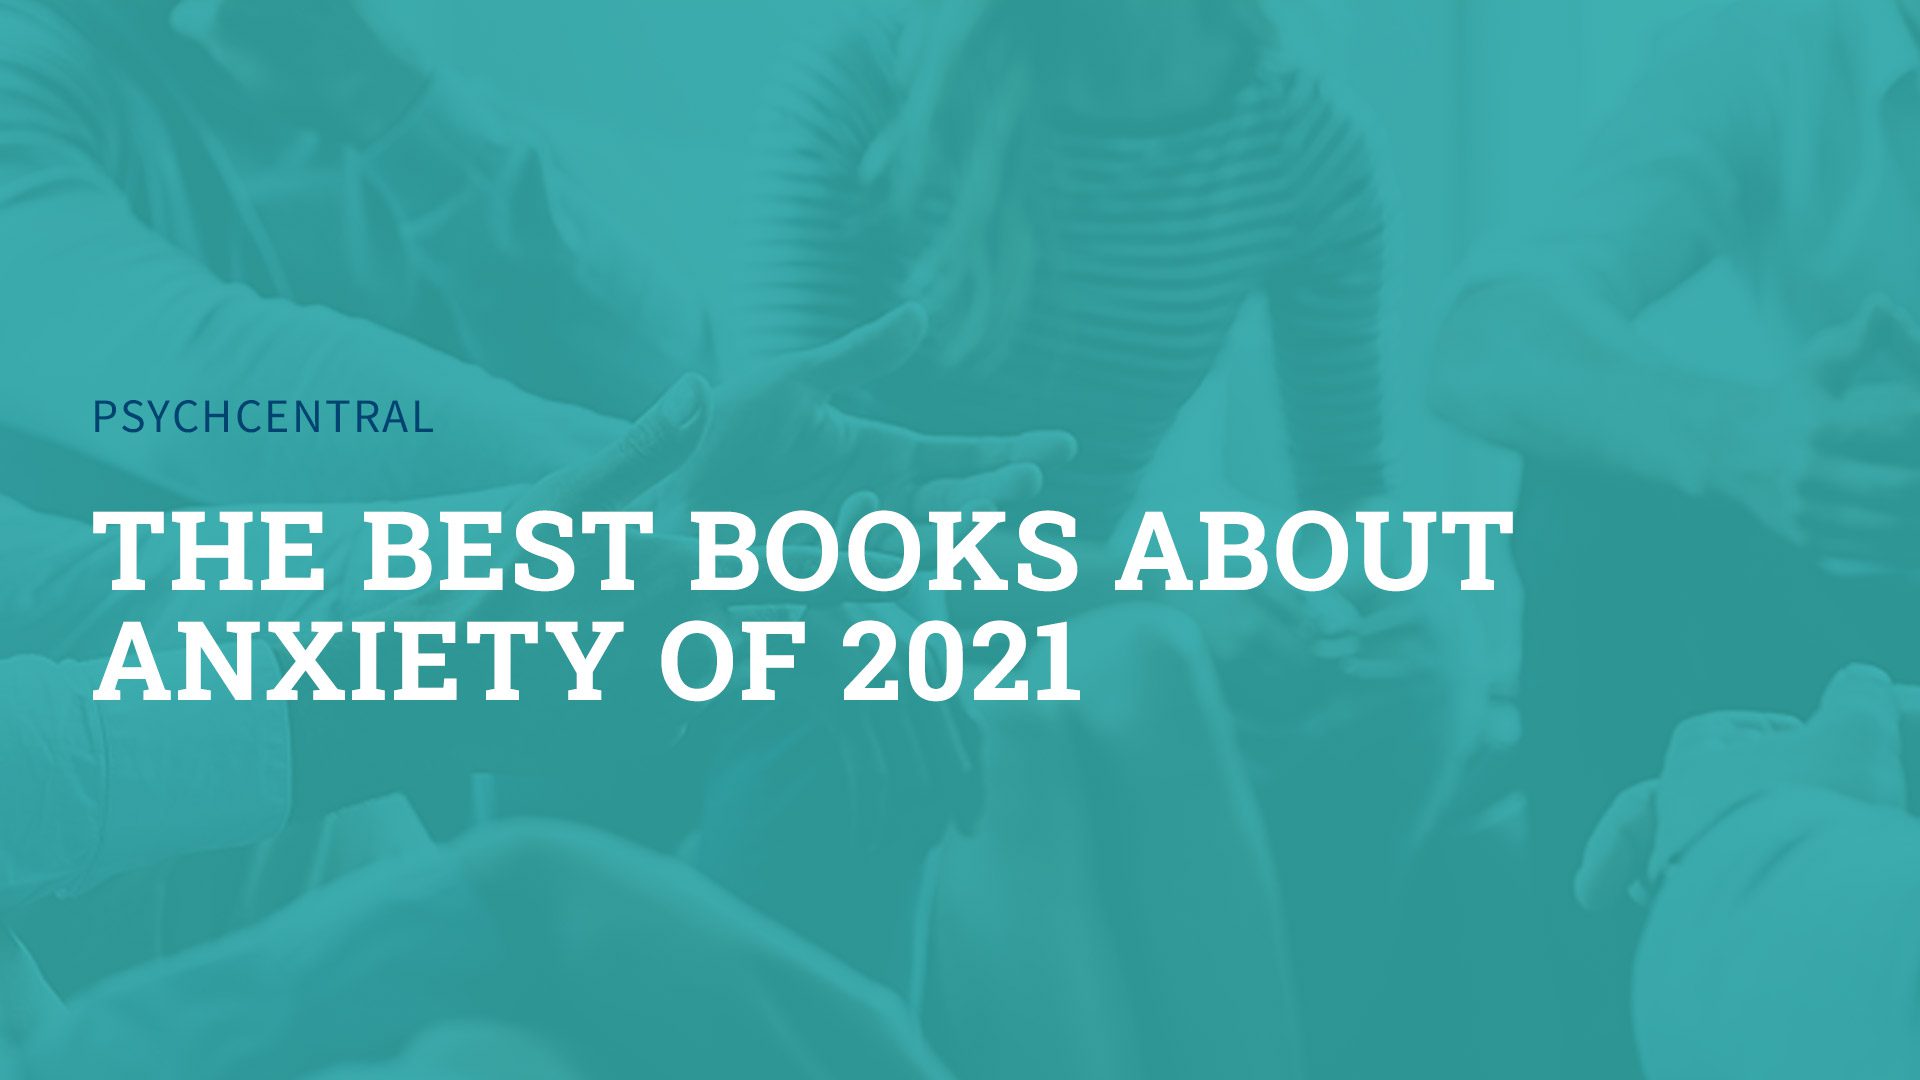 The Best Books About Anxiety of 2021